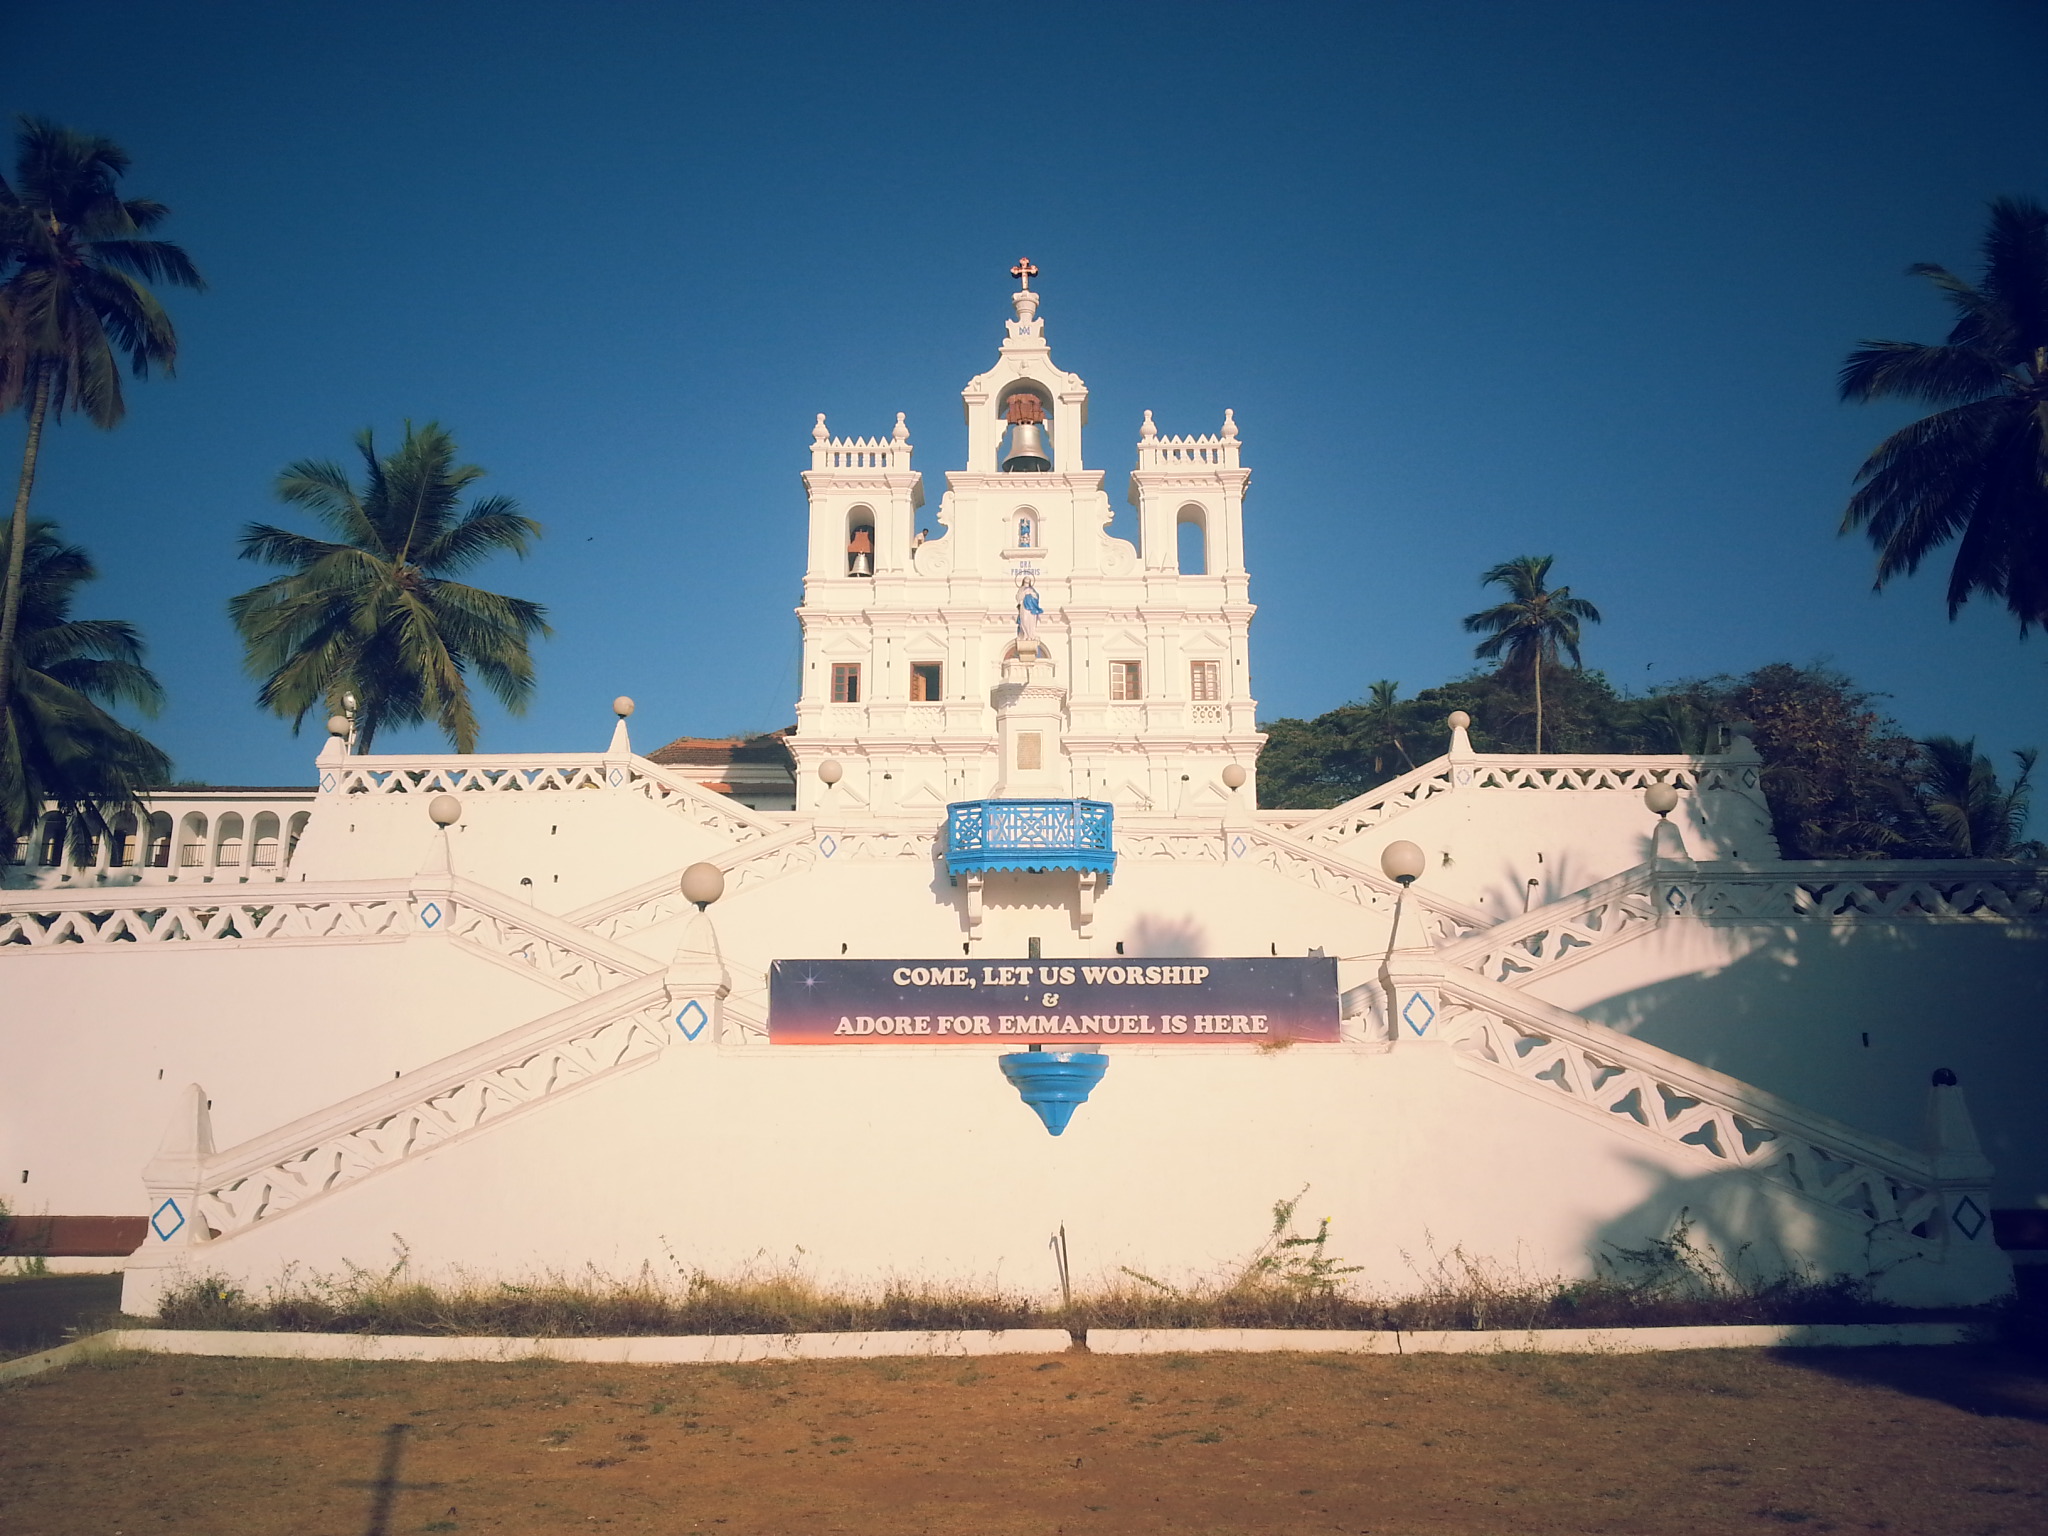 Our Lady of Immaculate - A Catholic Church